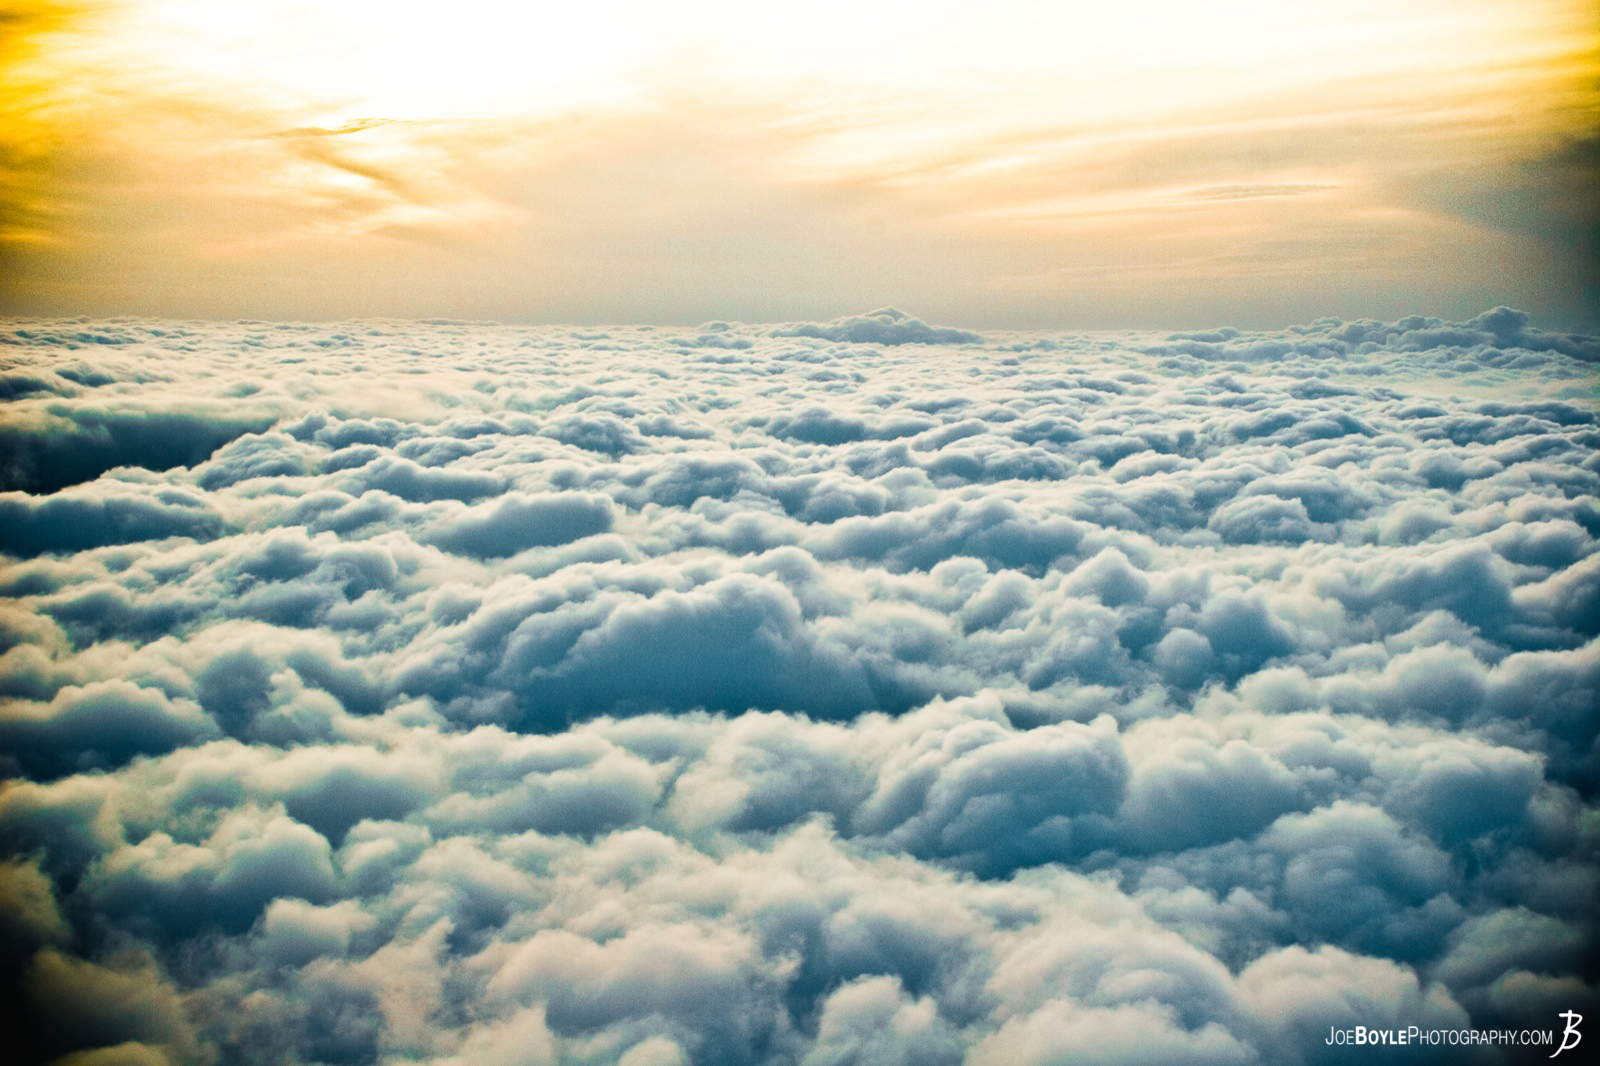  This image has won several awards on Pixoto.com! One award was for being in the top 20% of all photos submitted for the month of August. I captured this image while in a plane coming back from England, we were descending through the cloud deck and I was able to take this unique shot. It almost seemed as though it was a sunset above the clouds. 